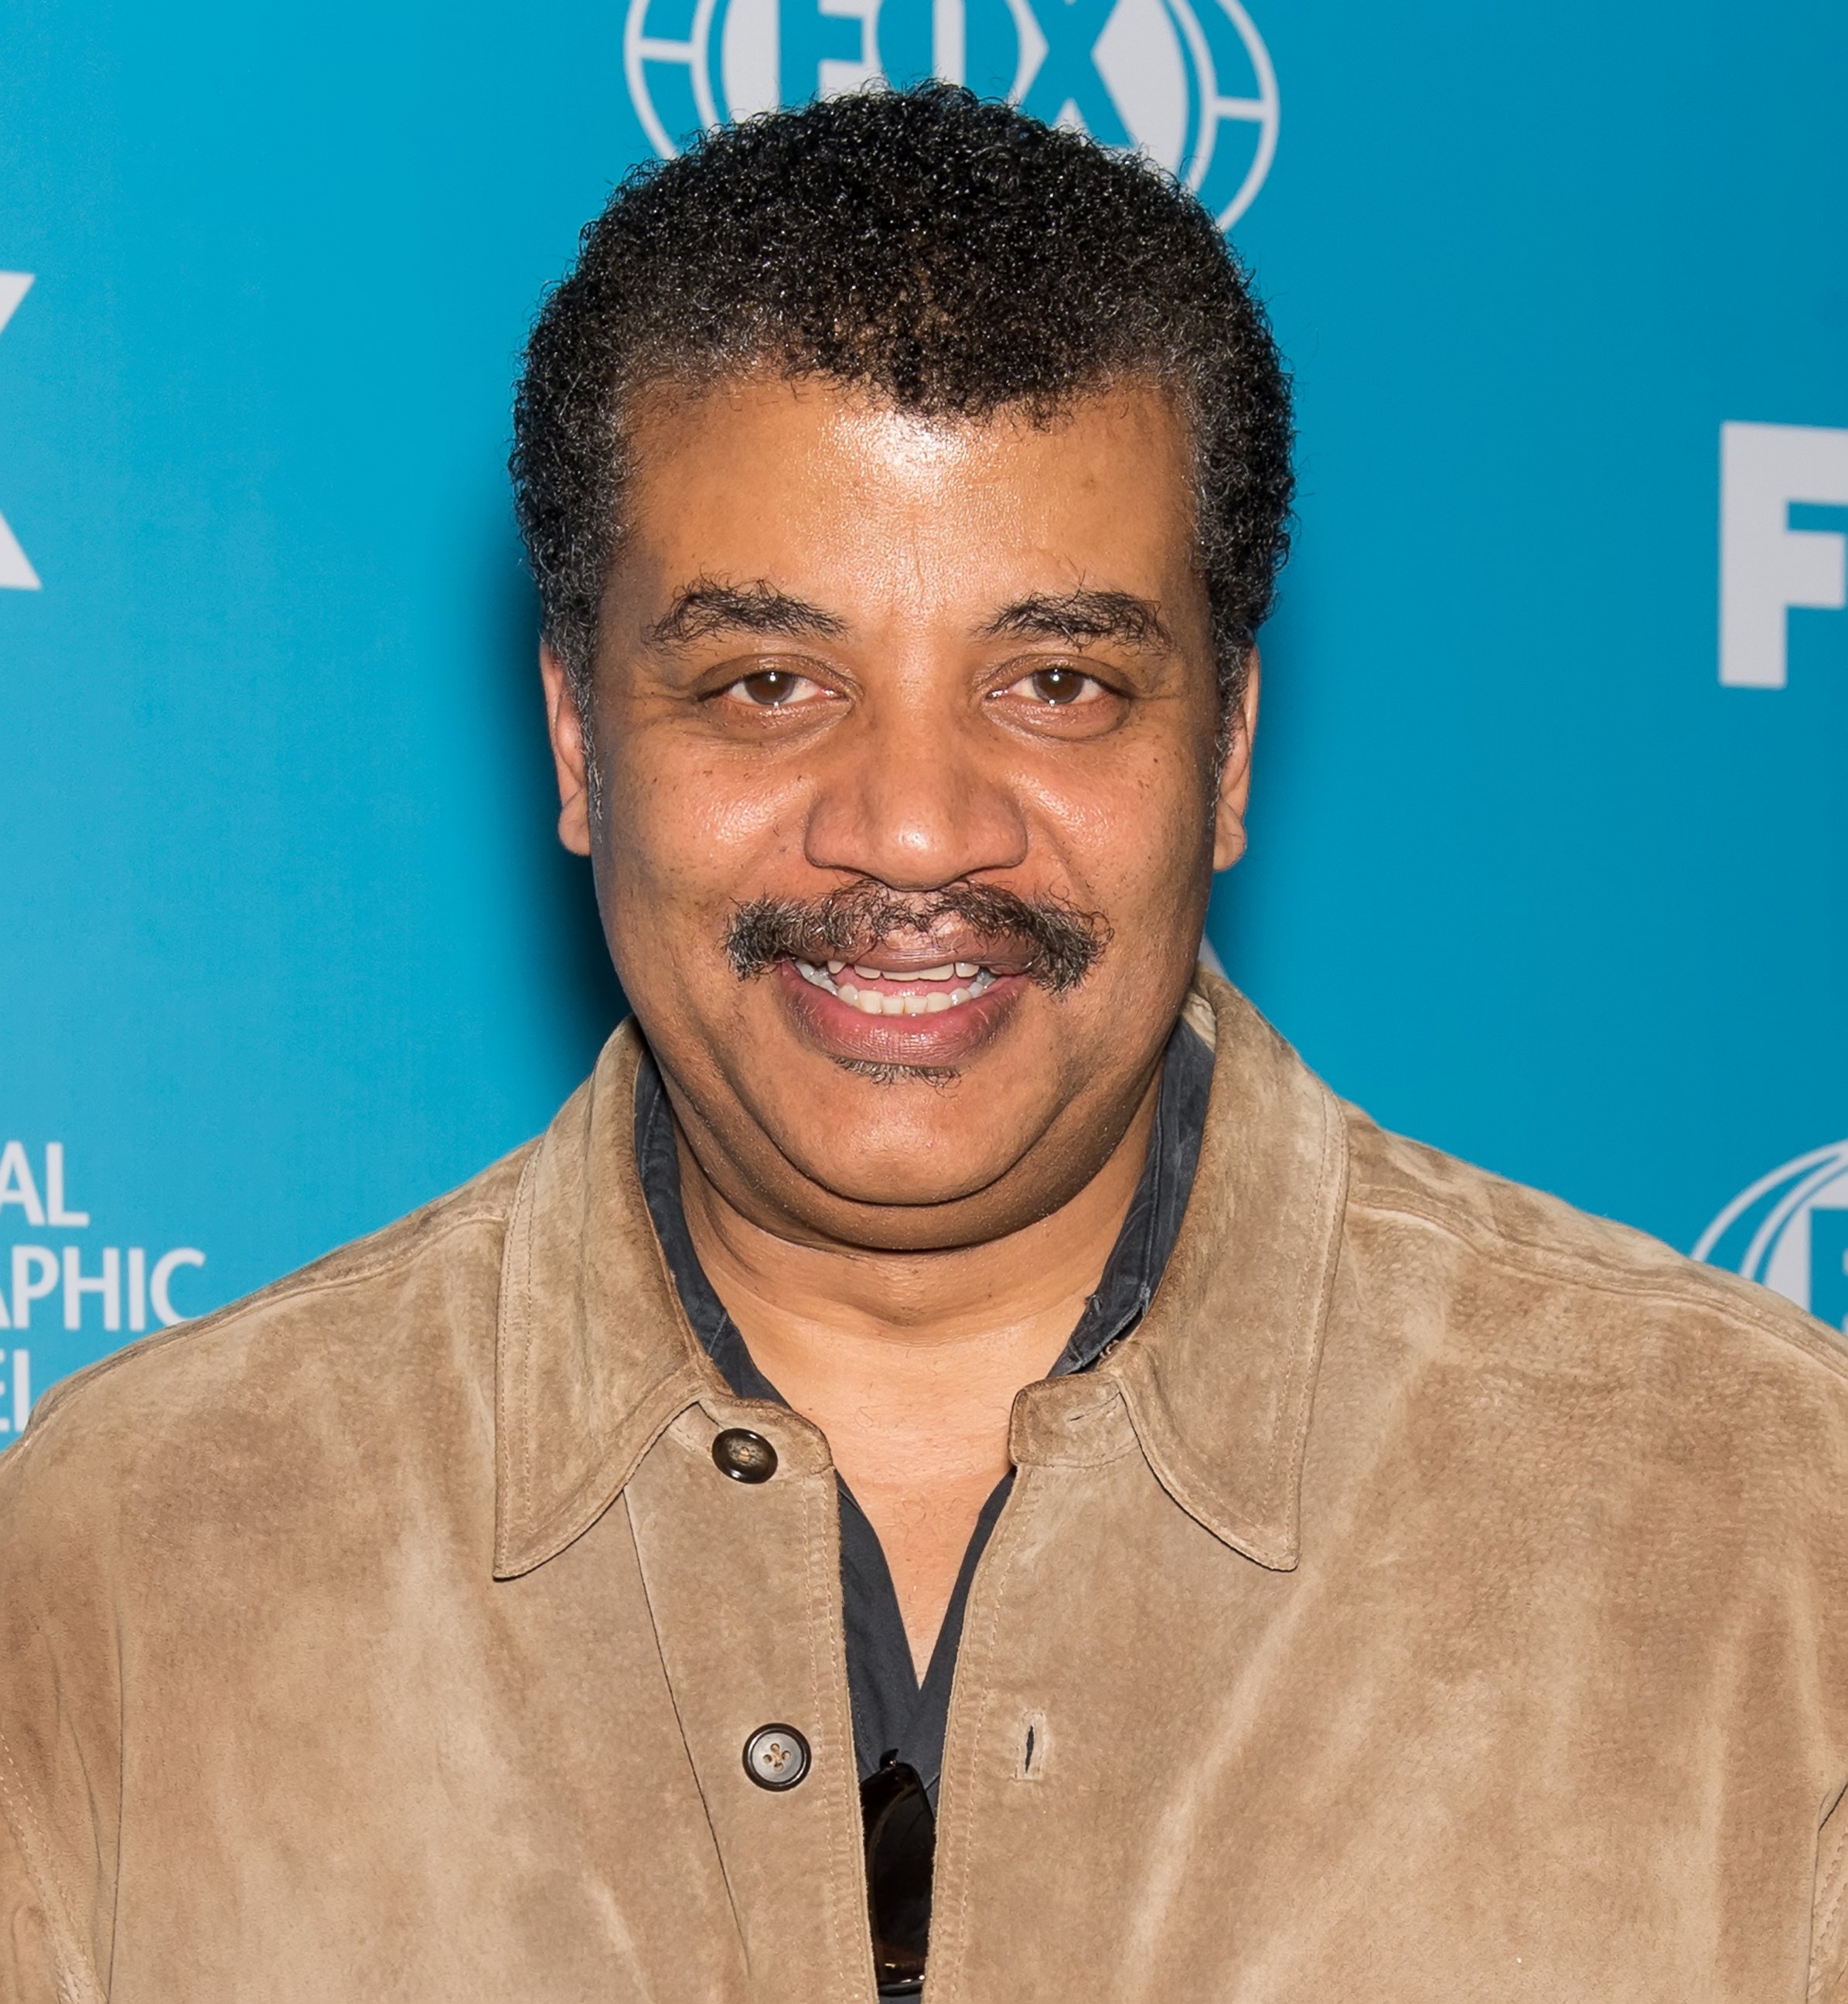 PHOTO: Astrophysicist Neil deGrasse Tyson attends the 2015 FOX Programming Presentation at Wollman Rink, Central Park on May 11, 2015 in New York City. 